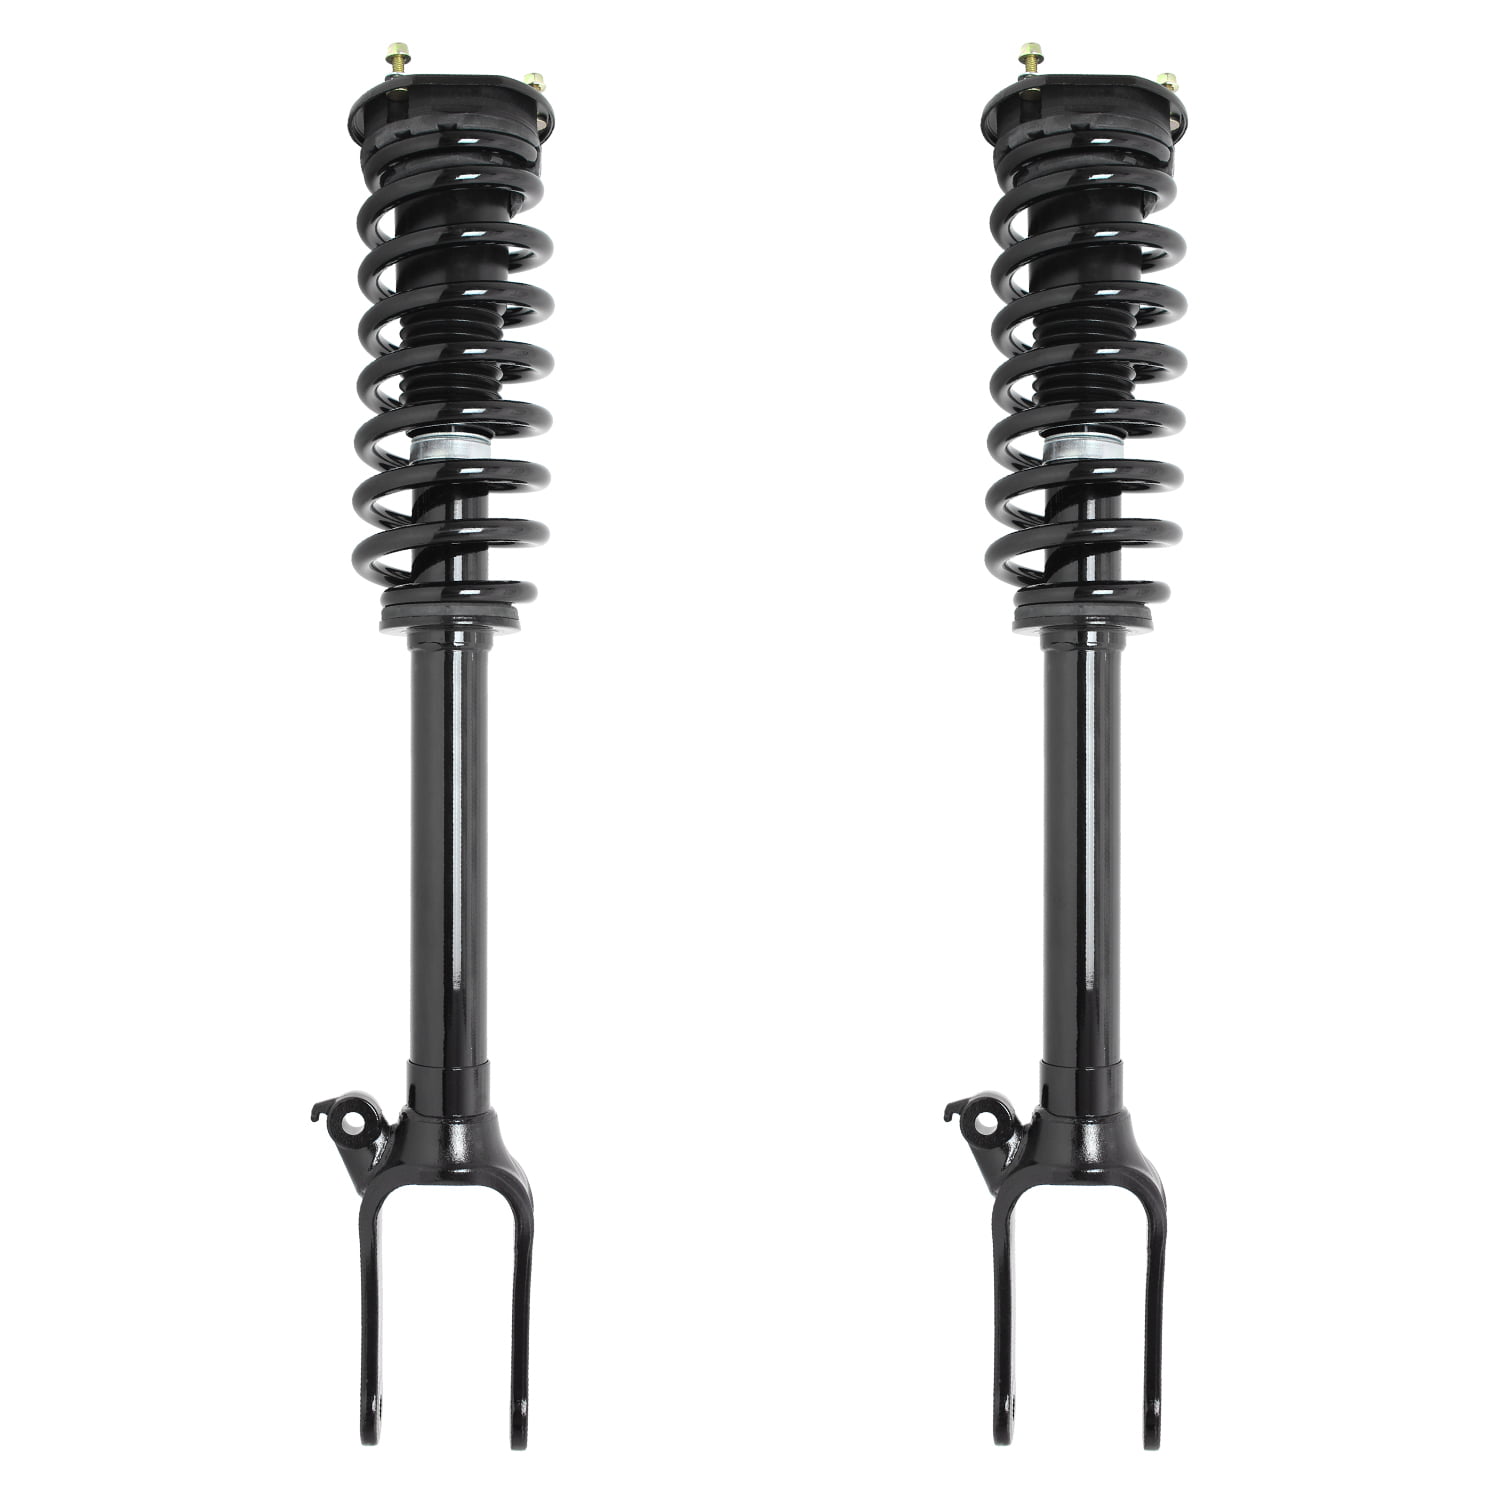 Pair Front Complete Struts & Coil Spring Assemblies Replacement for 2008-2011 Mercedes ML550 